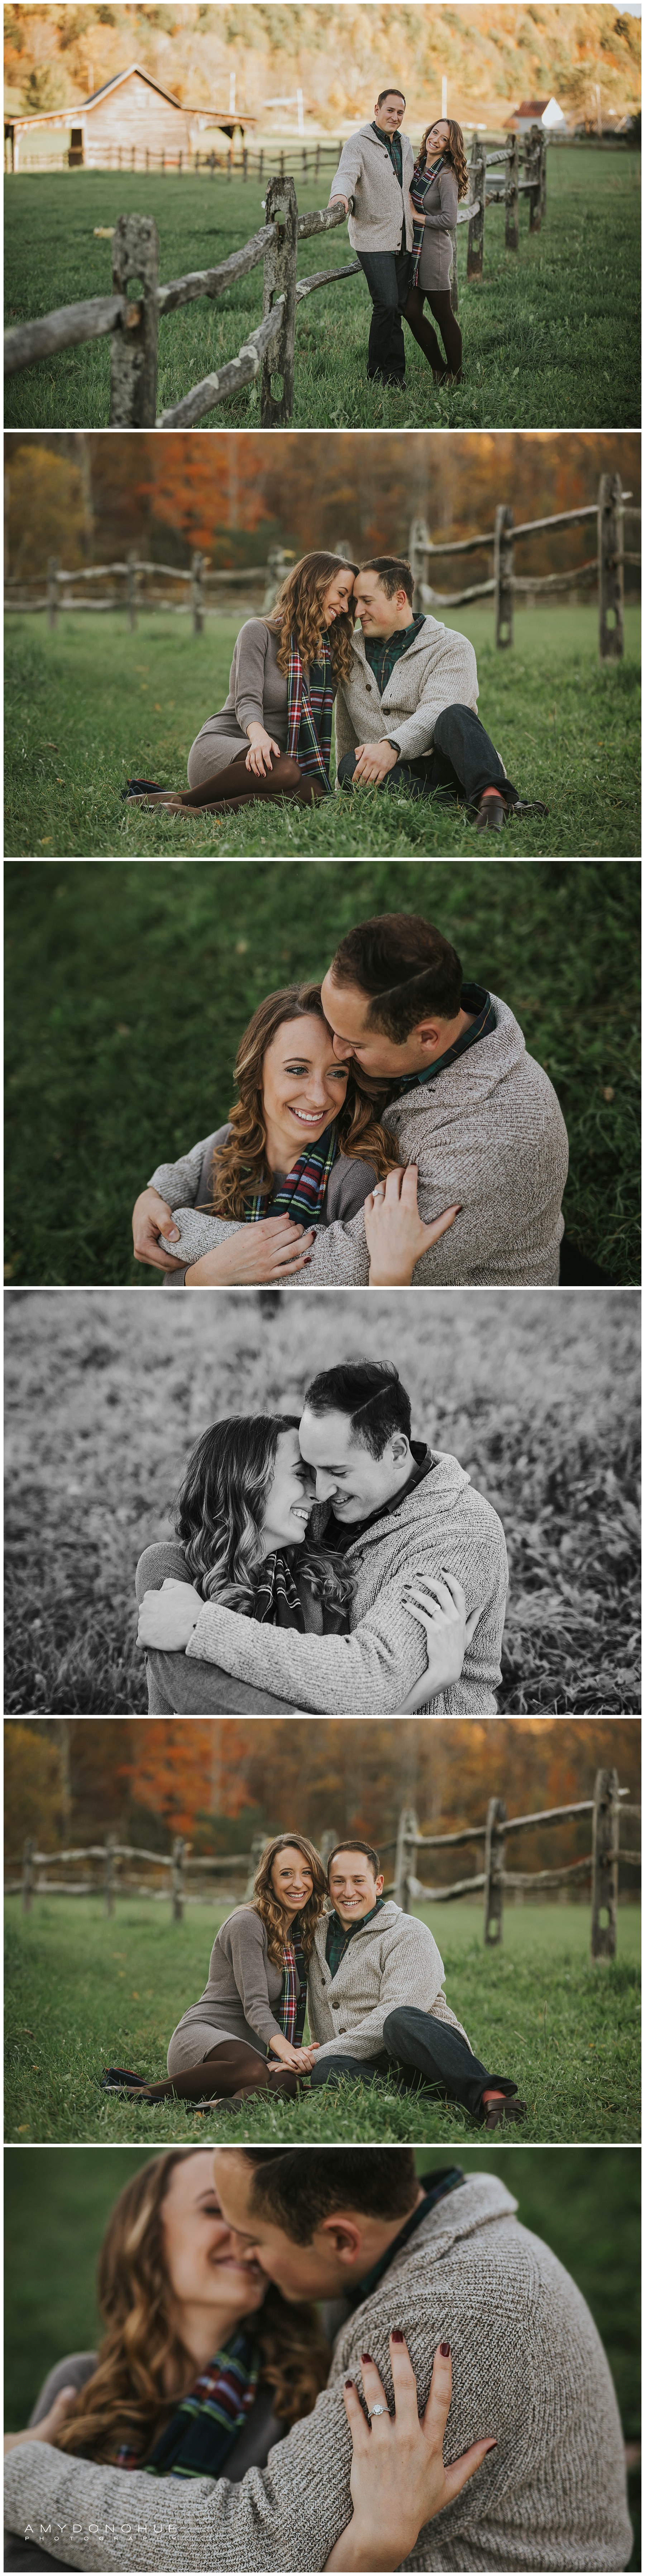 Vermont Engagement and Wedding Photographer | © Amy Donohue Photography